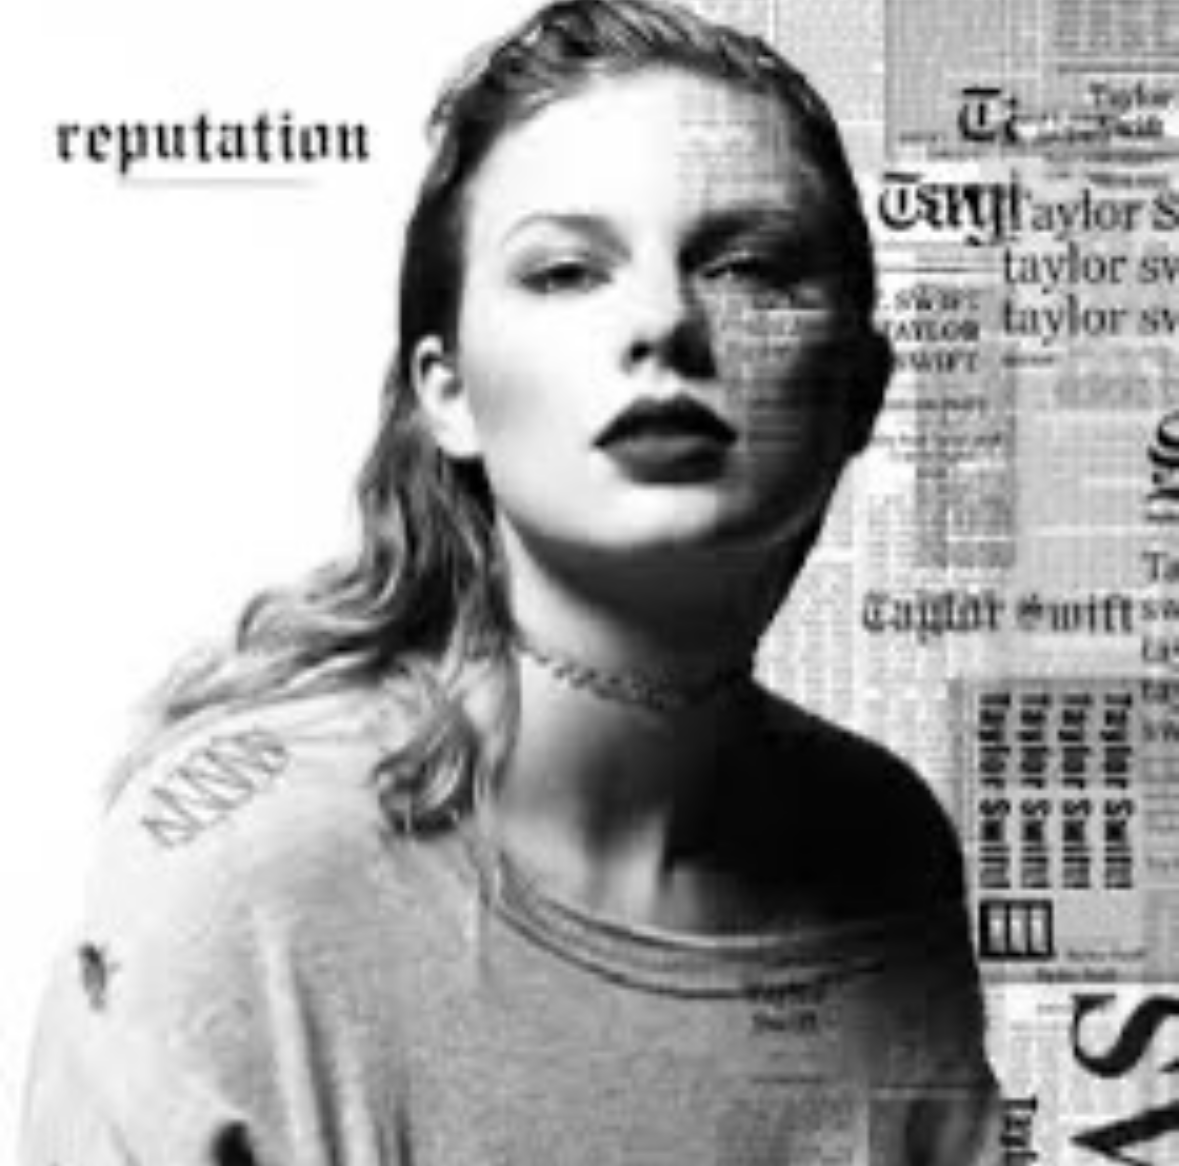 This was Taylor Swifts original Reputation album cover in 2017.